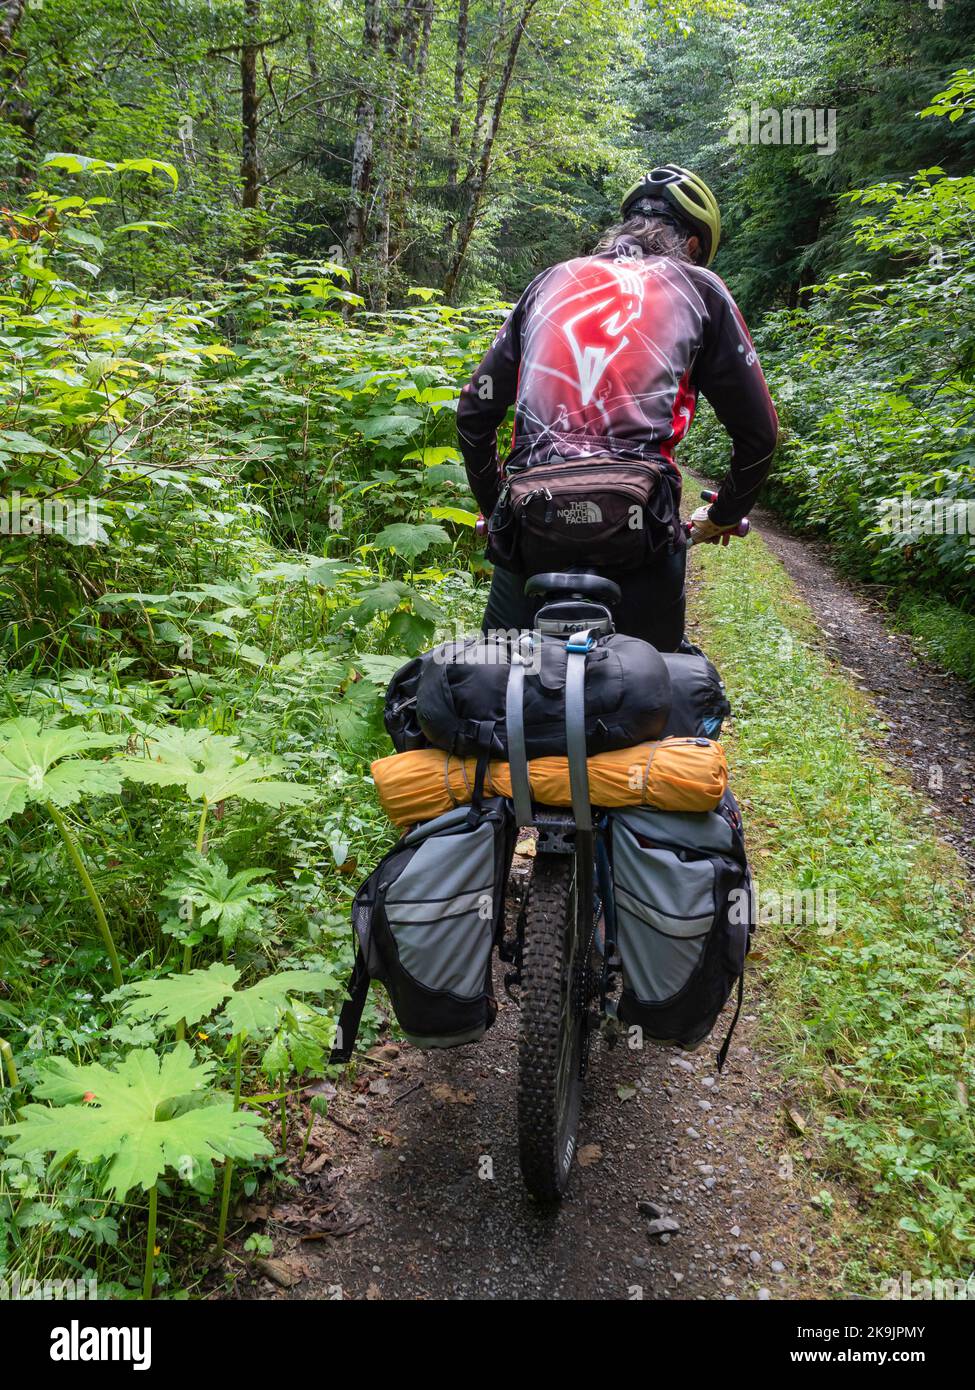 WA22653-00...WASHINGTON - Tom Kirkendall riding cross-Washington gravel race route following an overgrown forest road in Olympic National Forest. Stock Photo